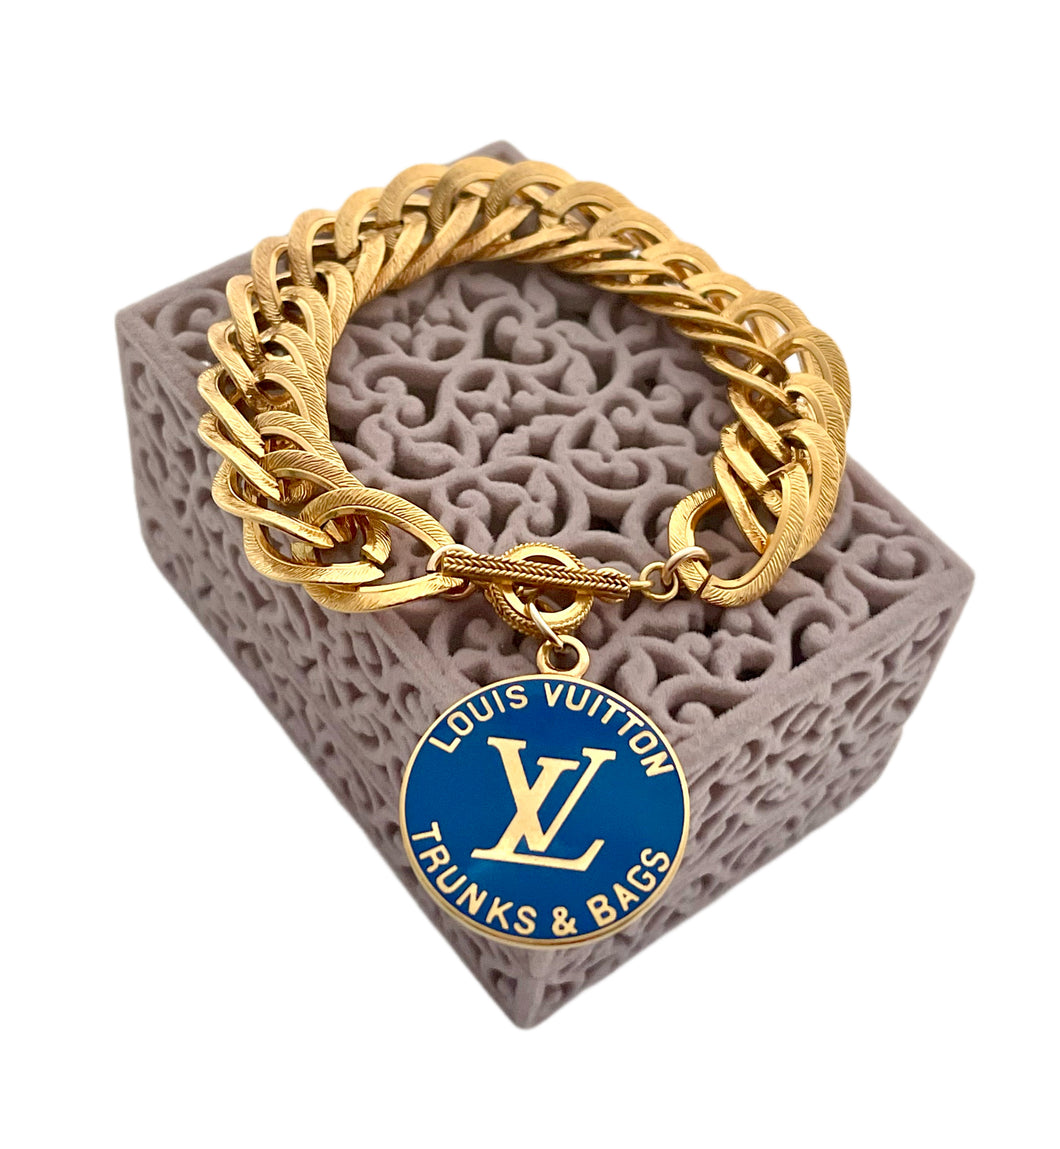 Repurposed Trunks and Bags Louis Vuitton Blue & Gold Tone Charm Toggle Bracelet